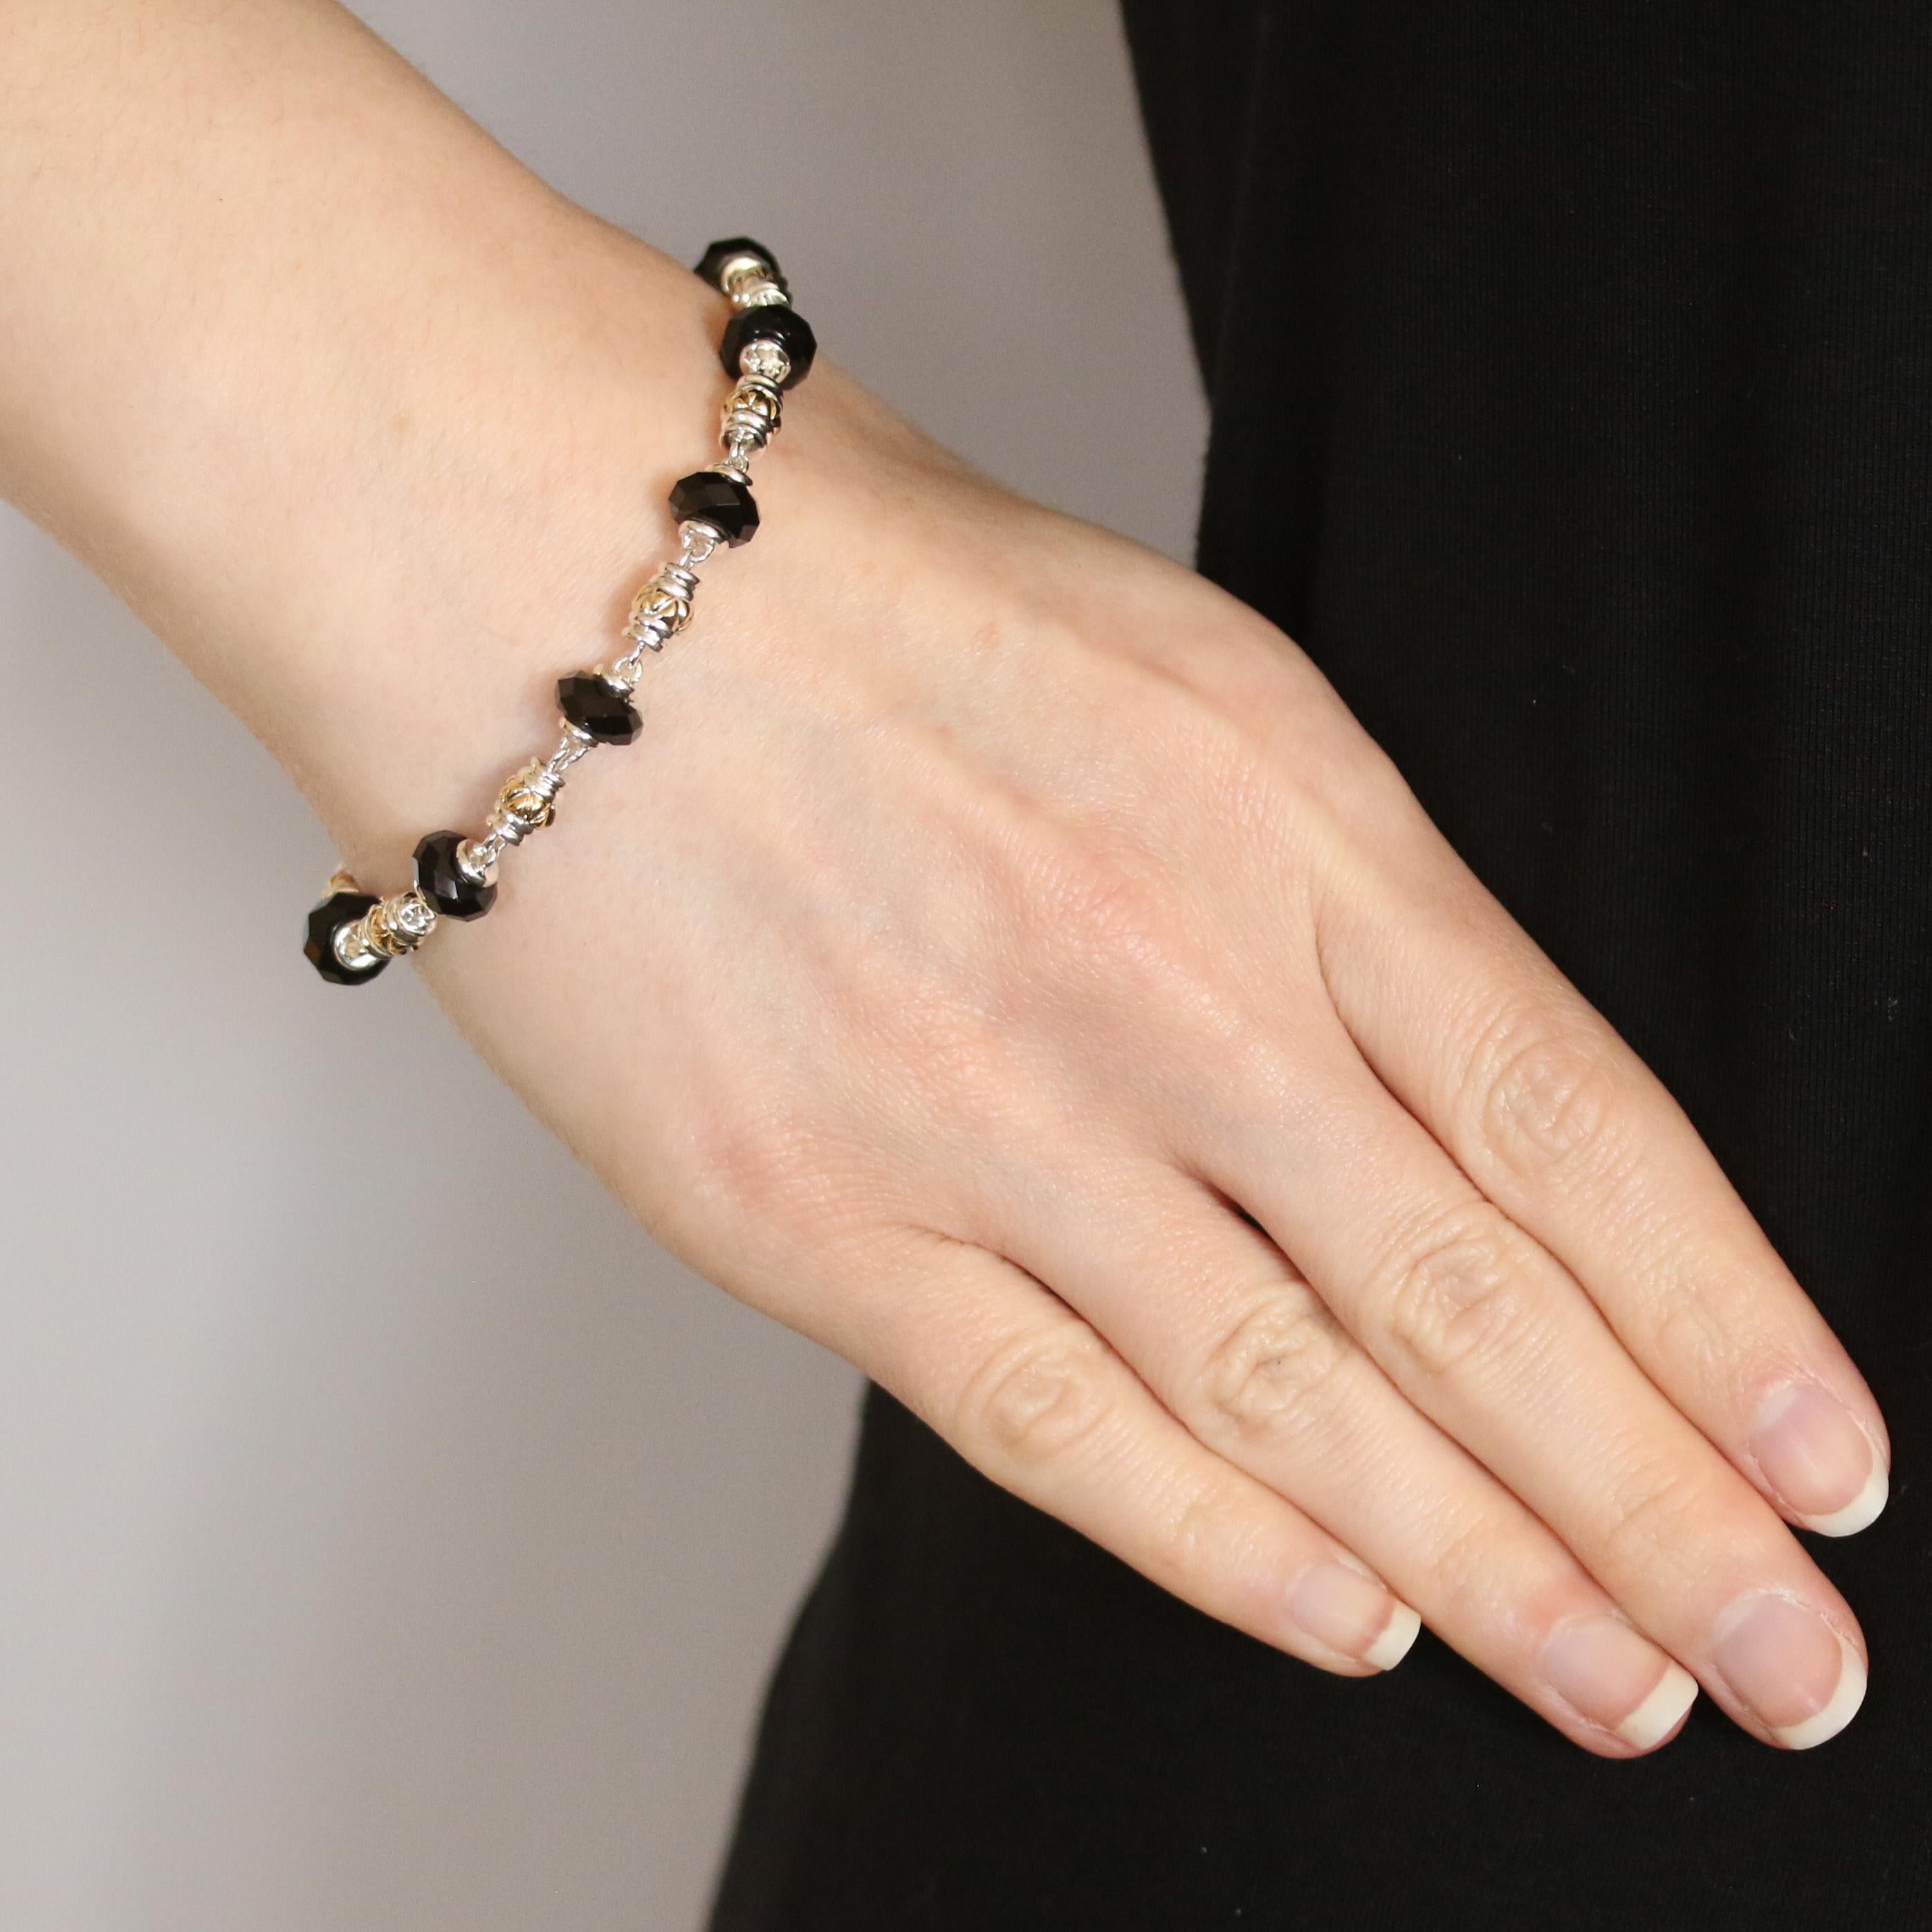 Metal Content: Sterling Silver & 14k Yellow Gold

Stone Information: 
Genuine Onyx
Cut: Rondelle Beads
Color: Black

Bracelet Style: Link
Closure Type: Spring Ring Clasp

Measurements: 
Length: 7 1/2